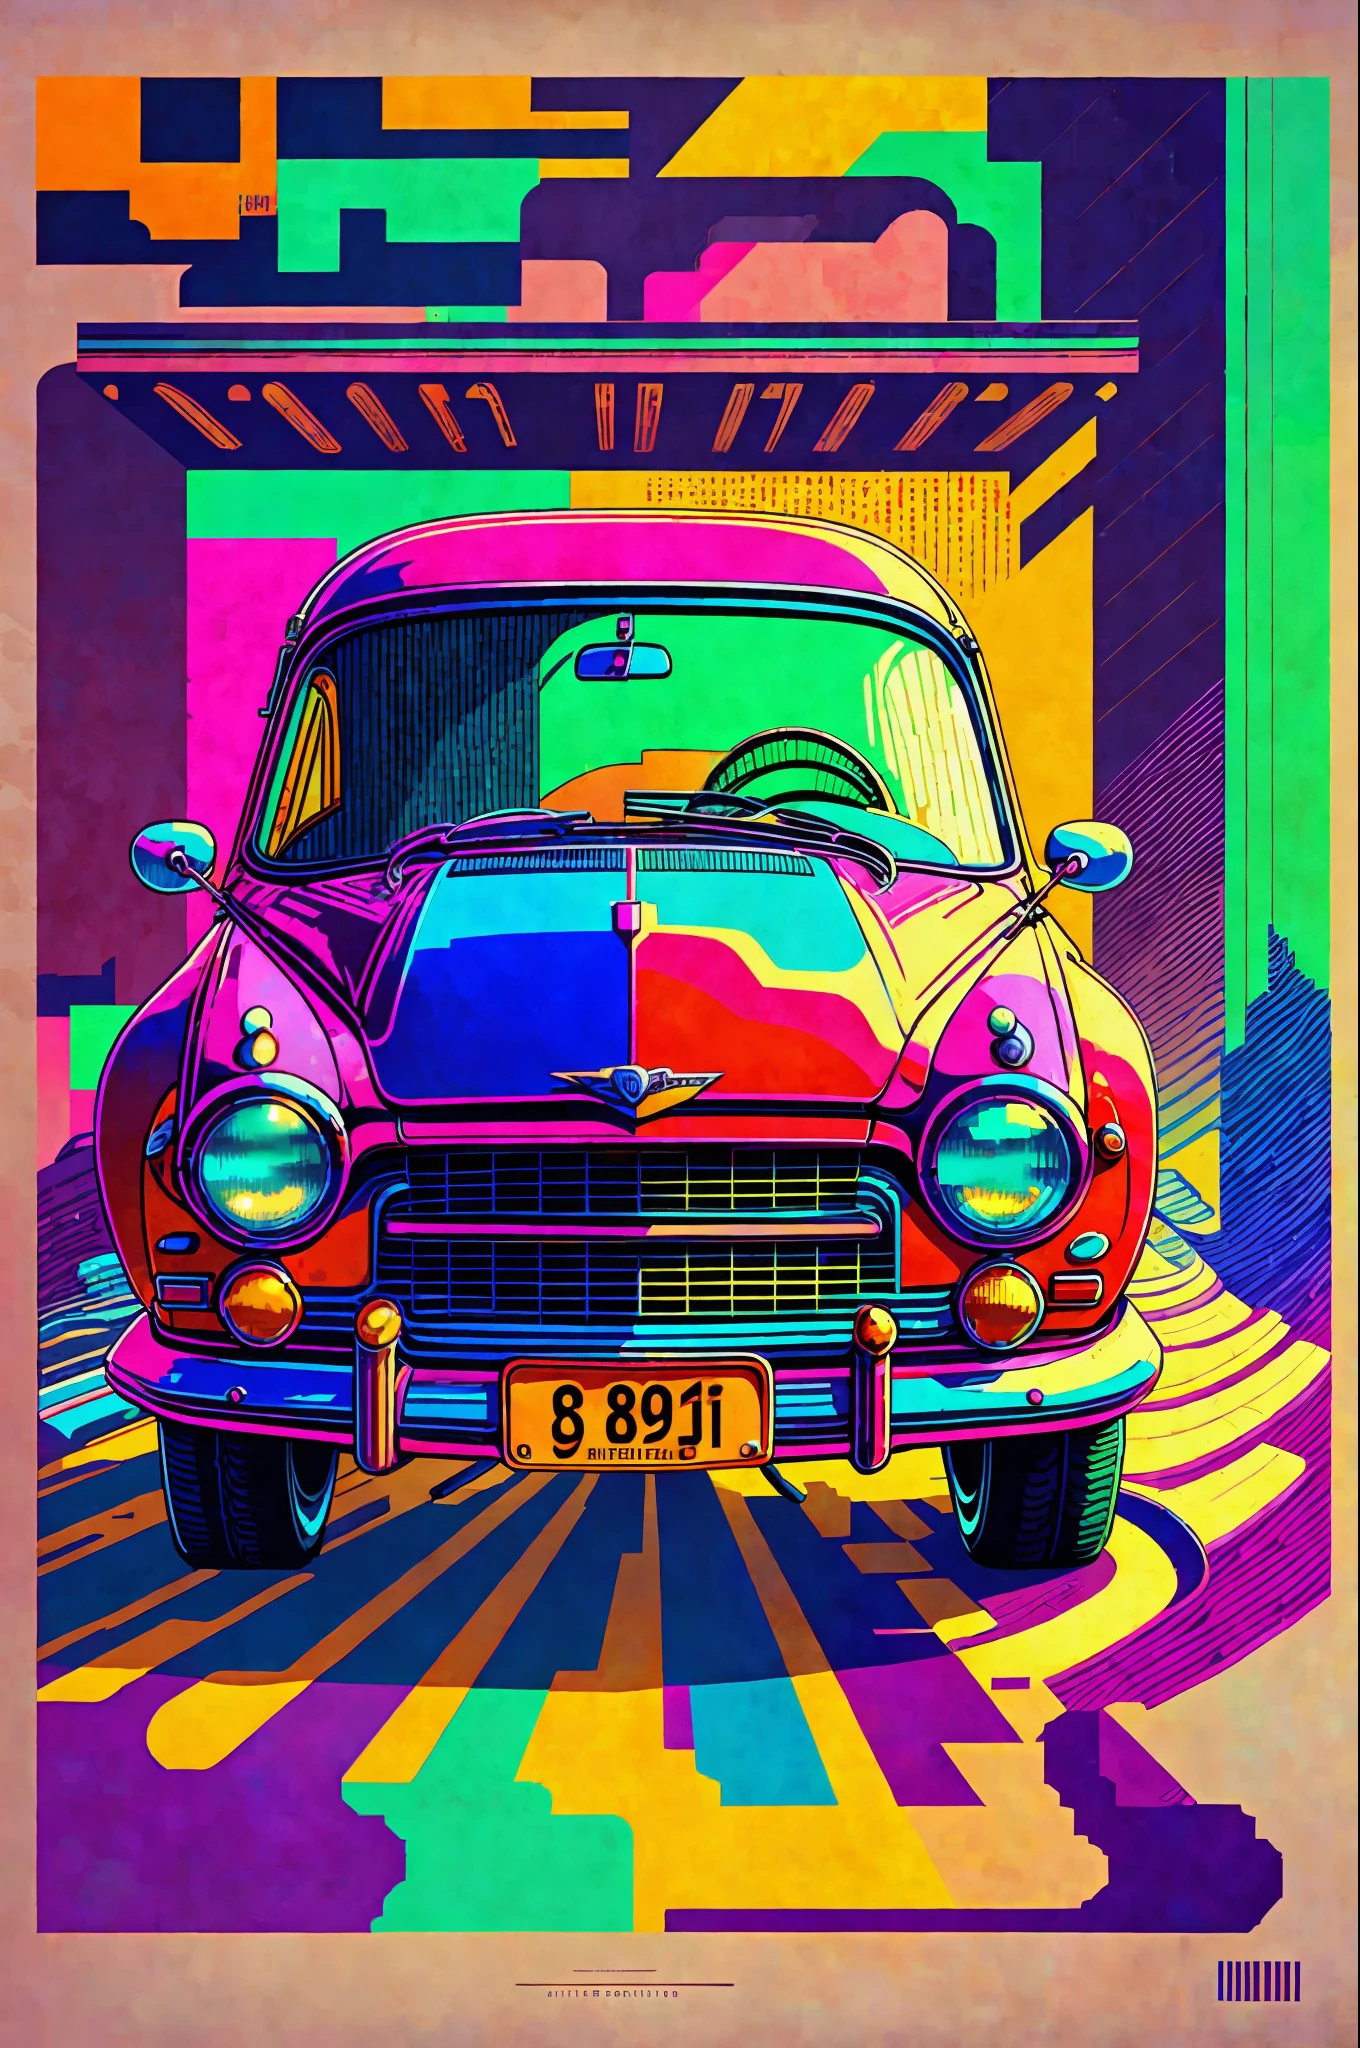 {masterpiece}: Pixel 90's car. Retro style with vibrant colors. Nostalgia in prints. (Width: 800, Height: 600, Method: Euler, Steps: 20, CFG Scale: 10, Seed: 12345, Upscale: 2)
Tags: Masterpiece, Car, Pixel, 90's, Retro style, Vibrant colors, Nostalgia. --auto --s2